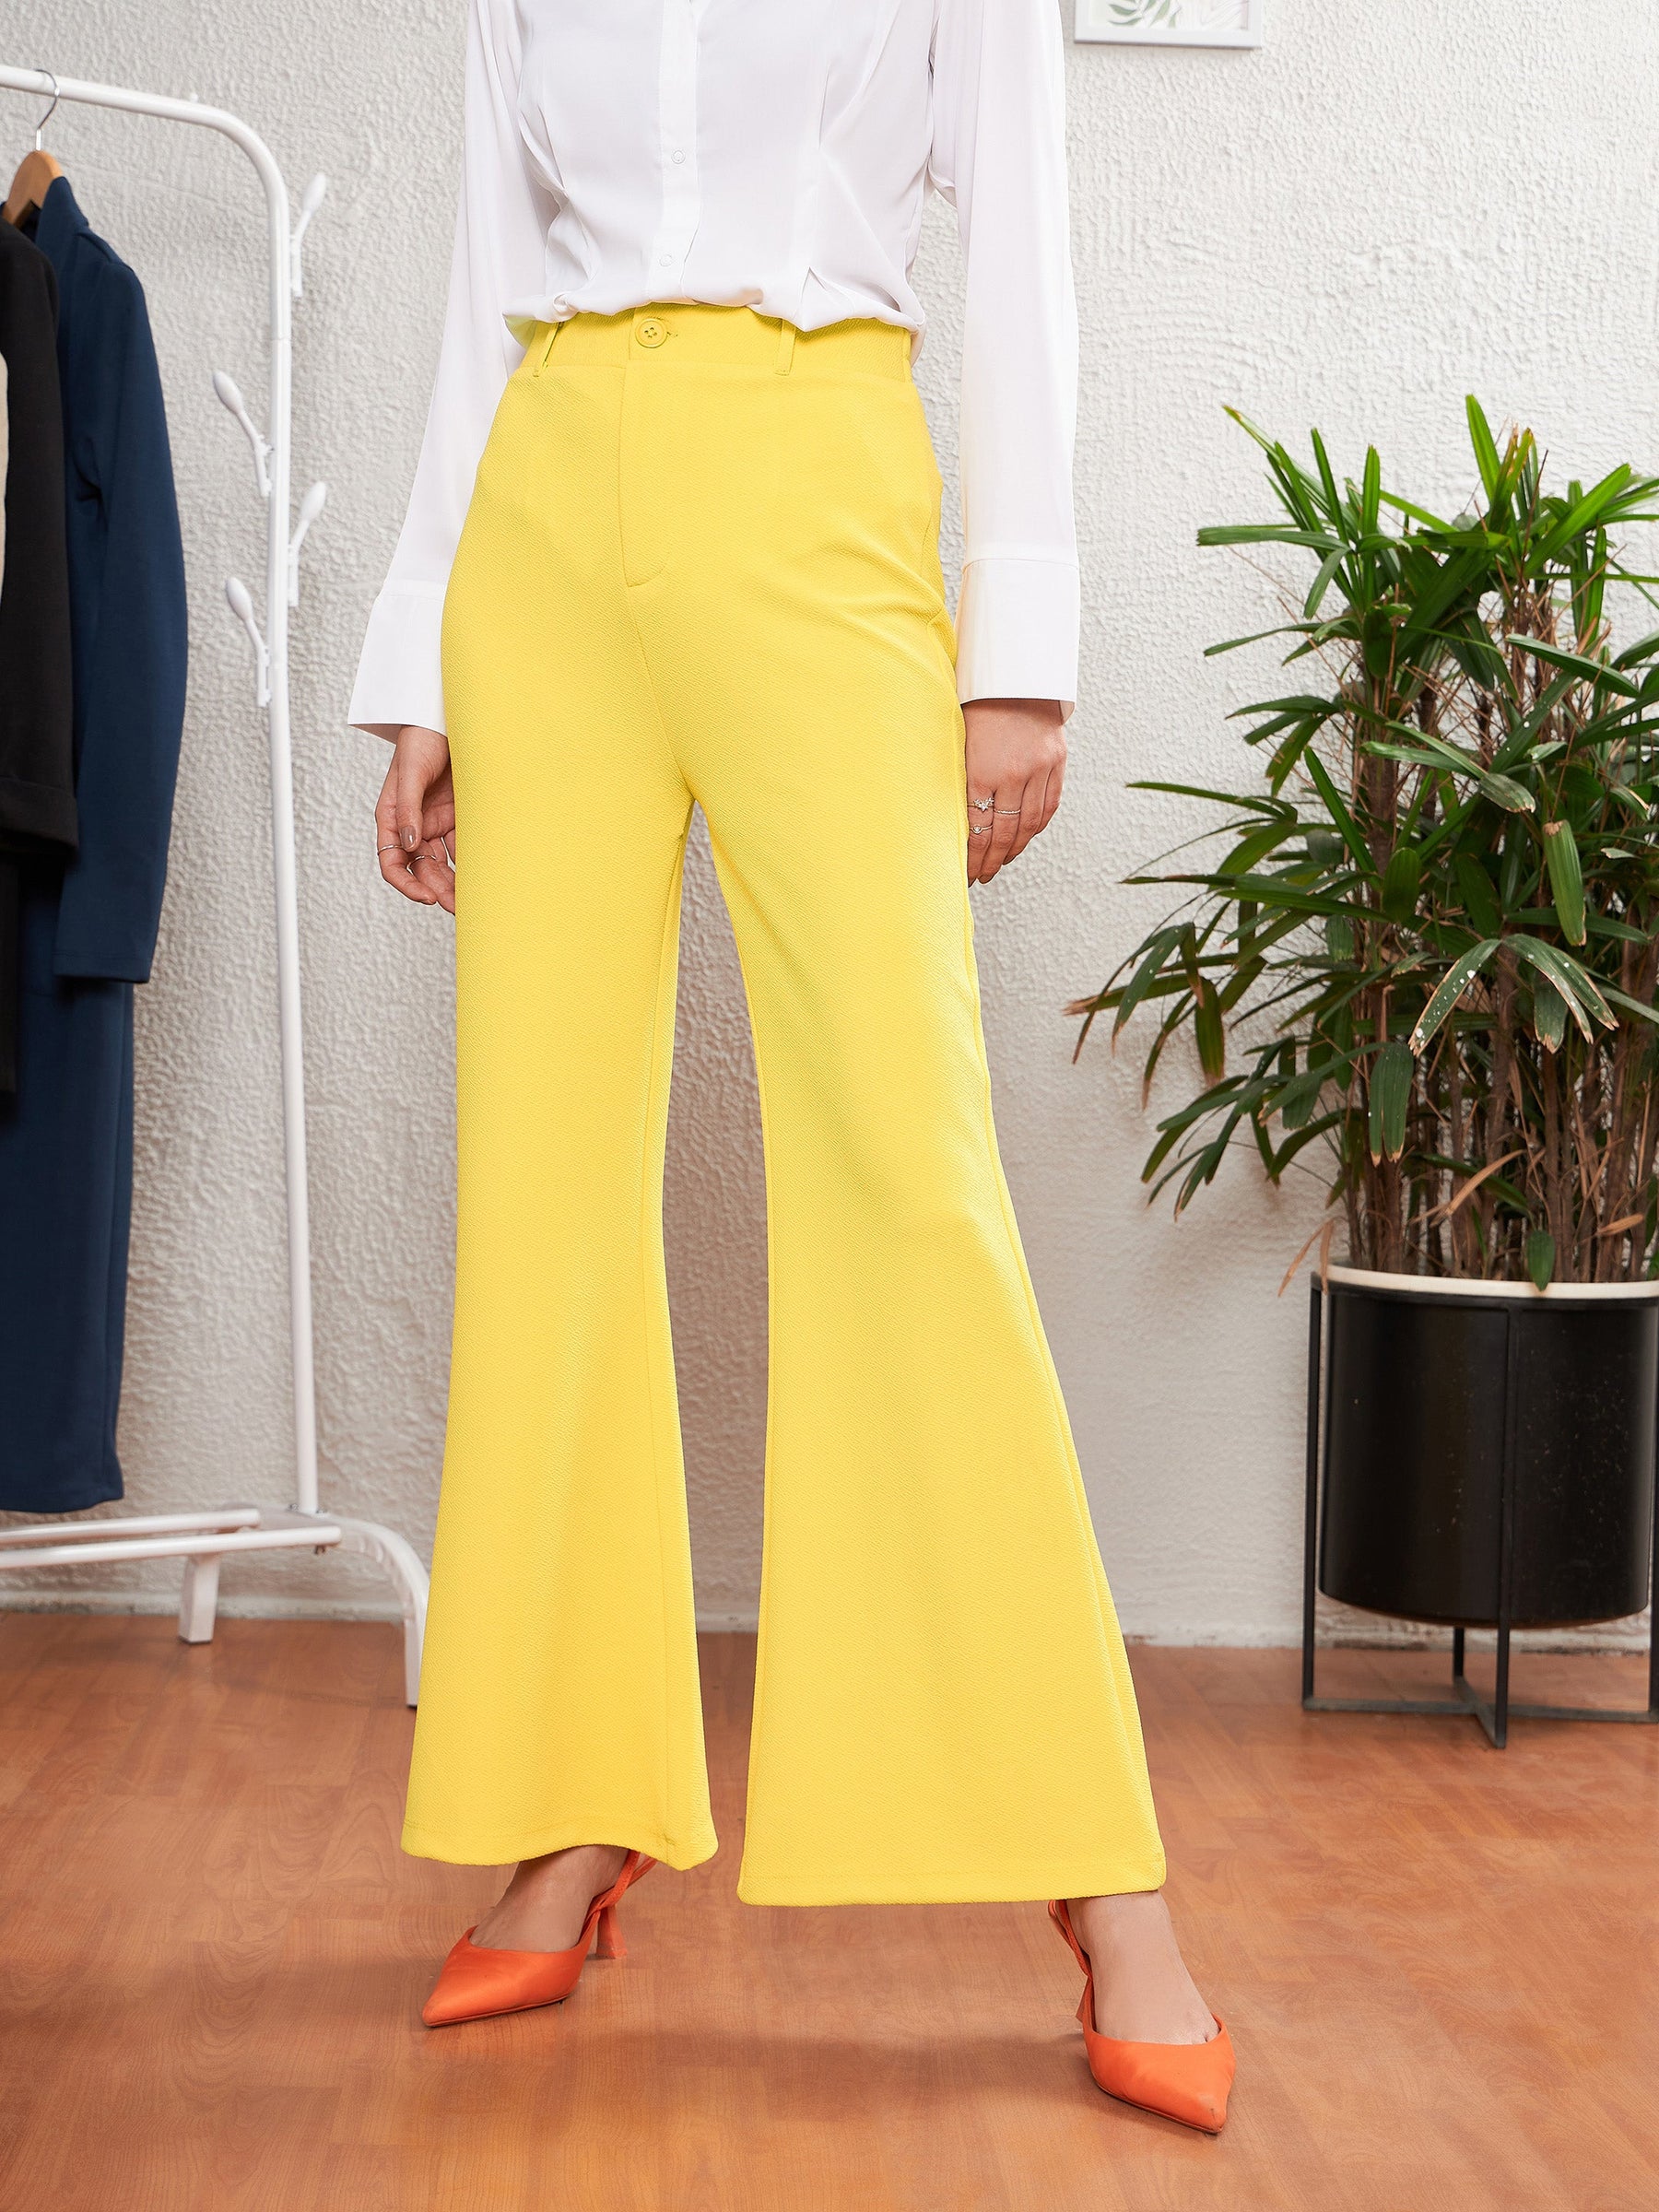 Merchant Archive Woolcrepe flared pants  Flare pants Mustard yellow pants  High waisted flare pants